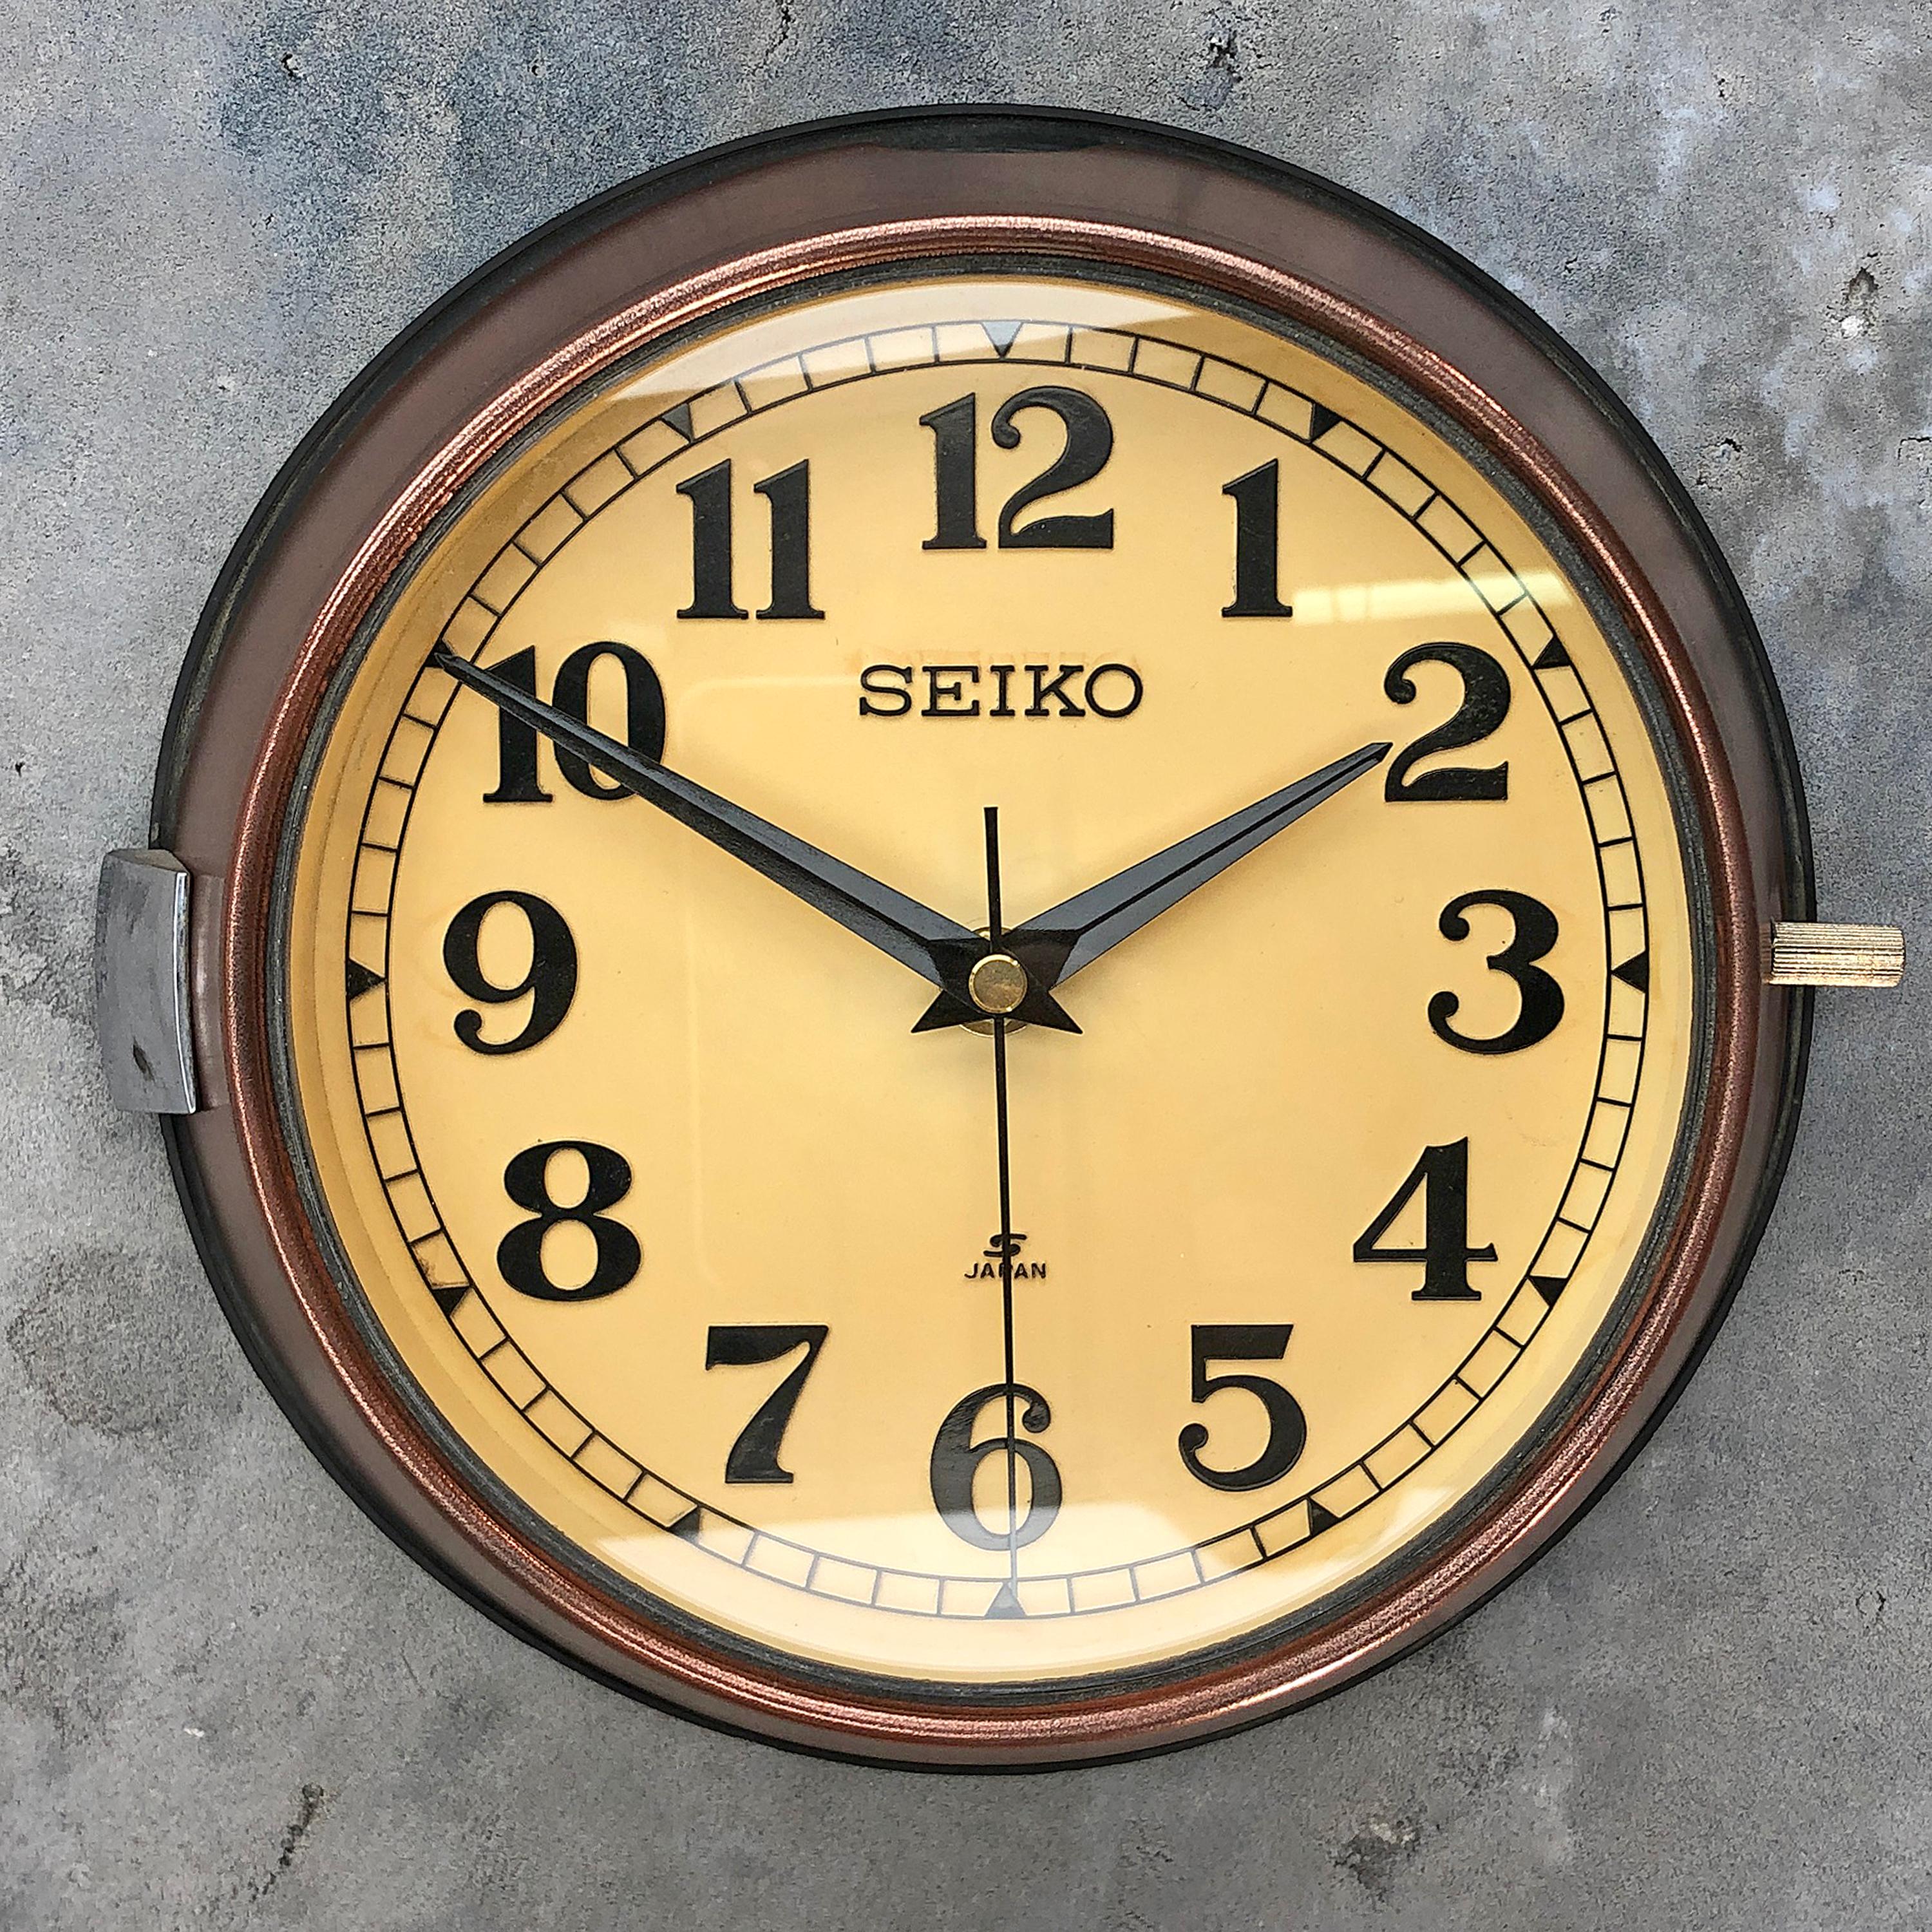 Seiko super tanker slave clock with copper veneer finishing.

A reclaimed and restored maritime slave clock.

These clocks were used in great numbers on super tankers, cargo ships and military vessels built during the 1970s and housed a movement